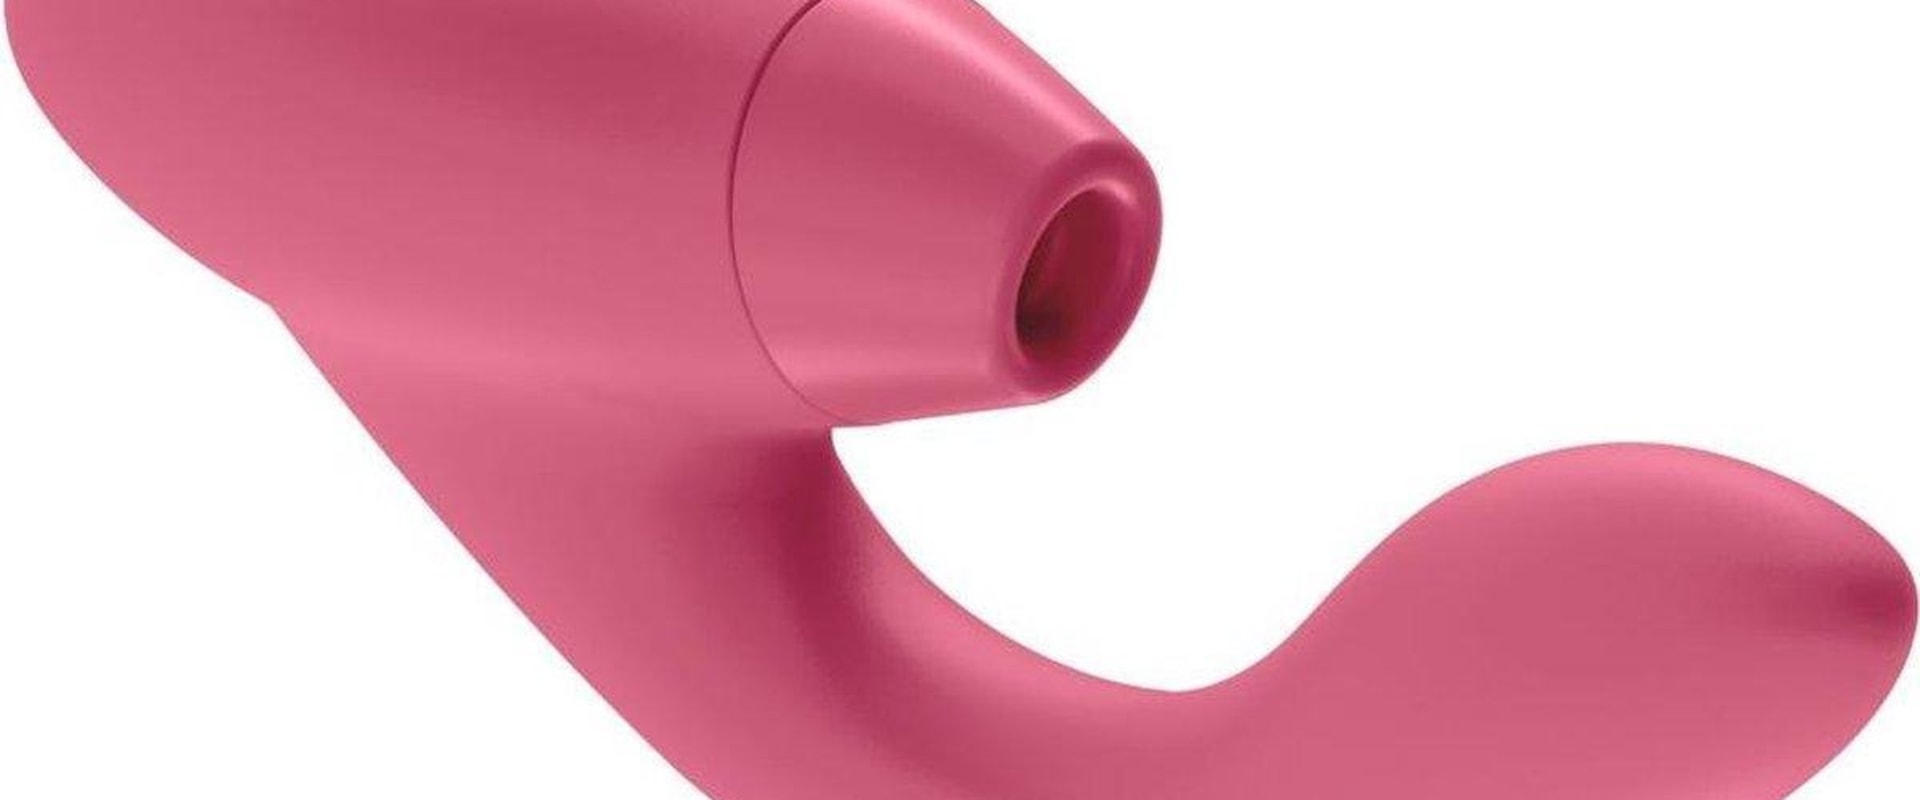 All About Loud and Bulky Vibrators: Debunking the Myths